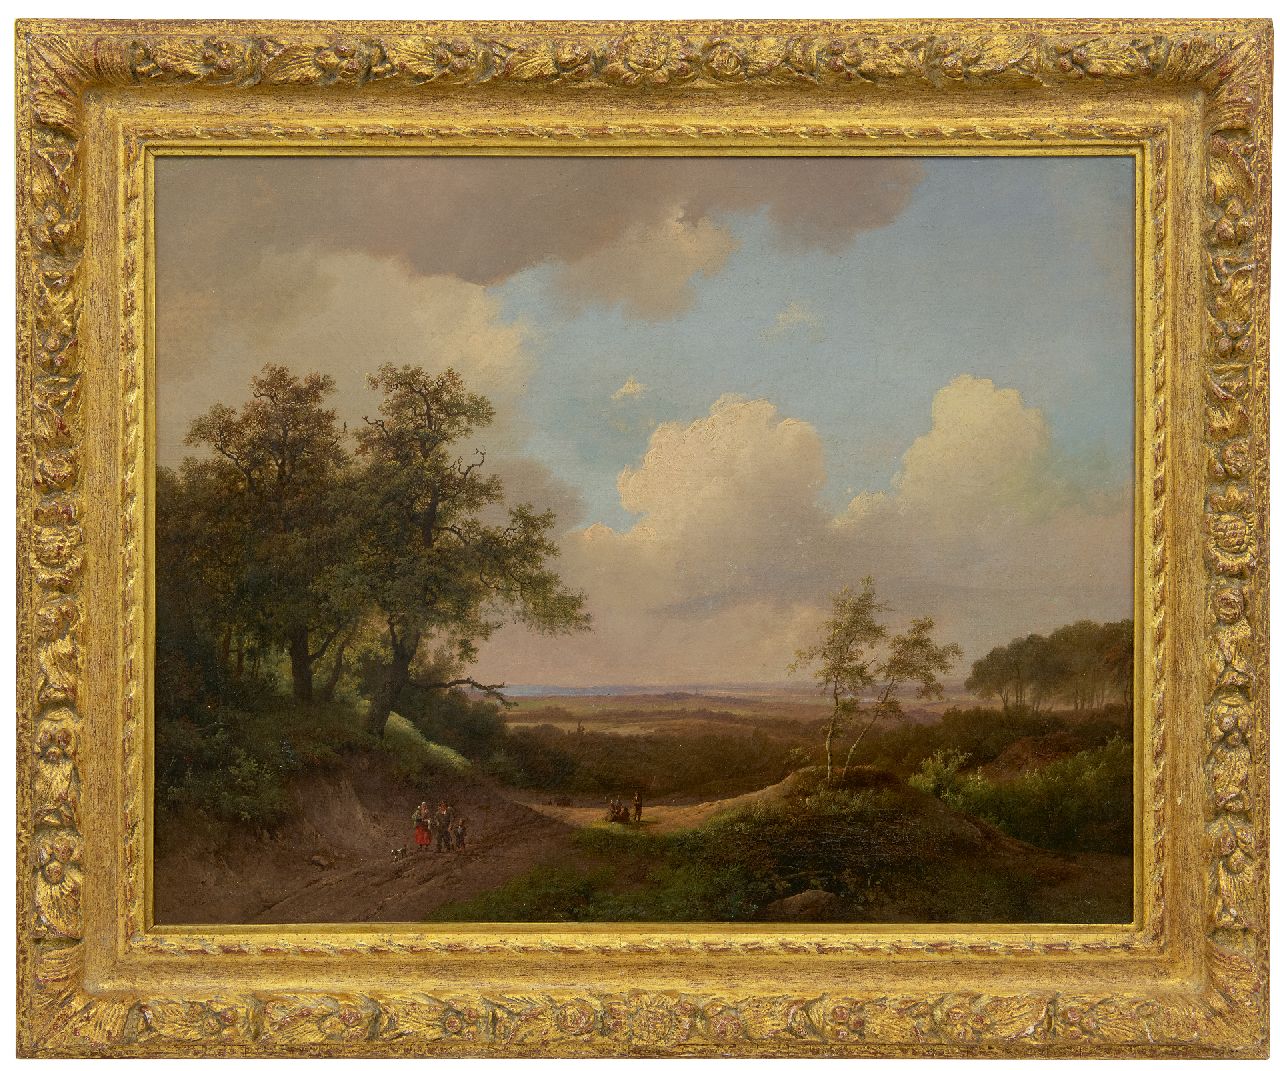 Koekkoek I M.A.  | Marinus Adrianus Koekkoek I | Paintings offered for sale | Panoramic landscape with country people, oil on canvas 51.0 x 65.0 cm, signed l.l. and dated 1850